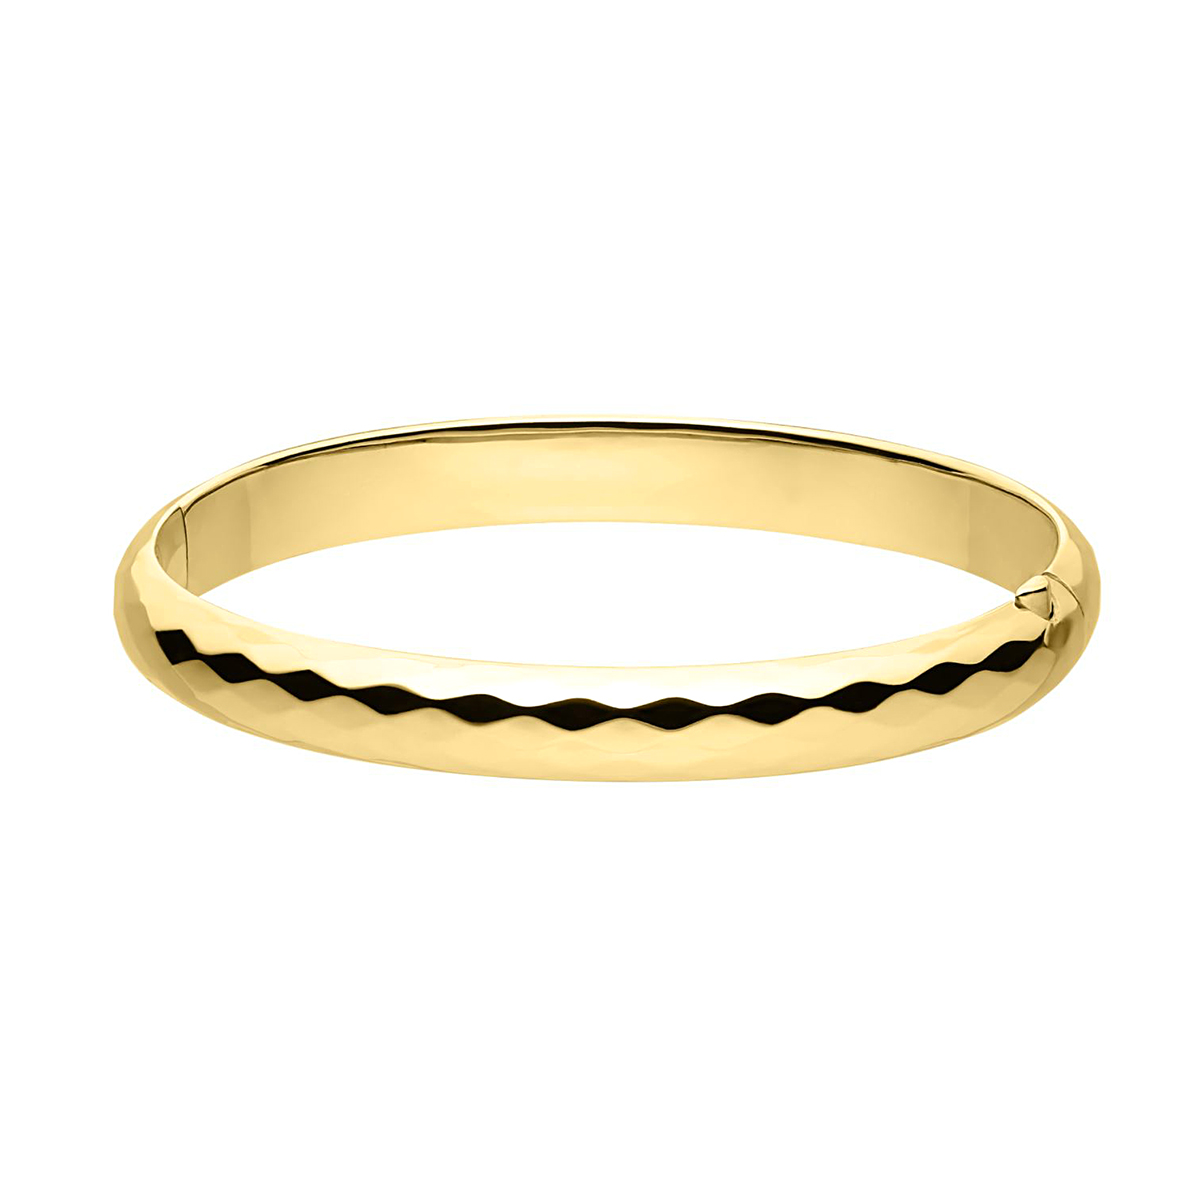 14 Karat Yellow Gold Filled Embossed 7 Inch Bangle Bracelet With Push Button Guard & Hinge Clasp.